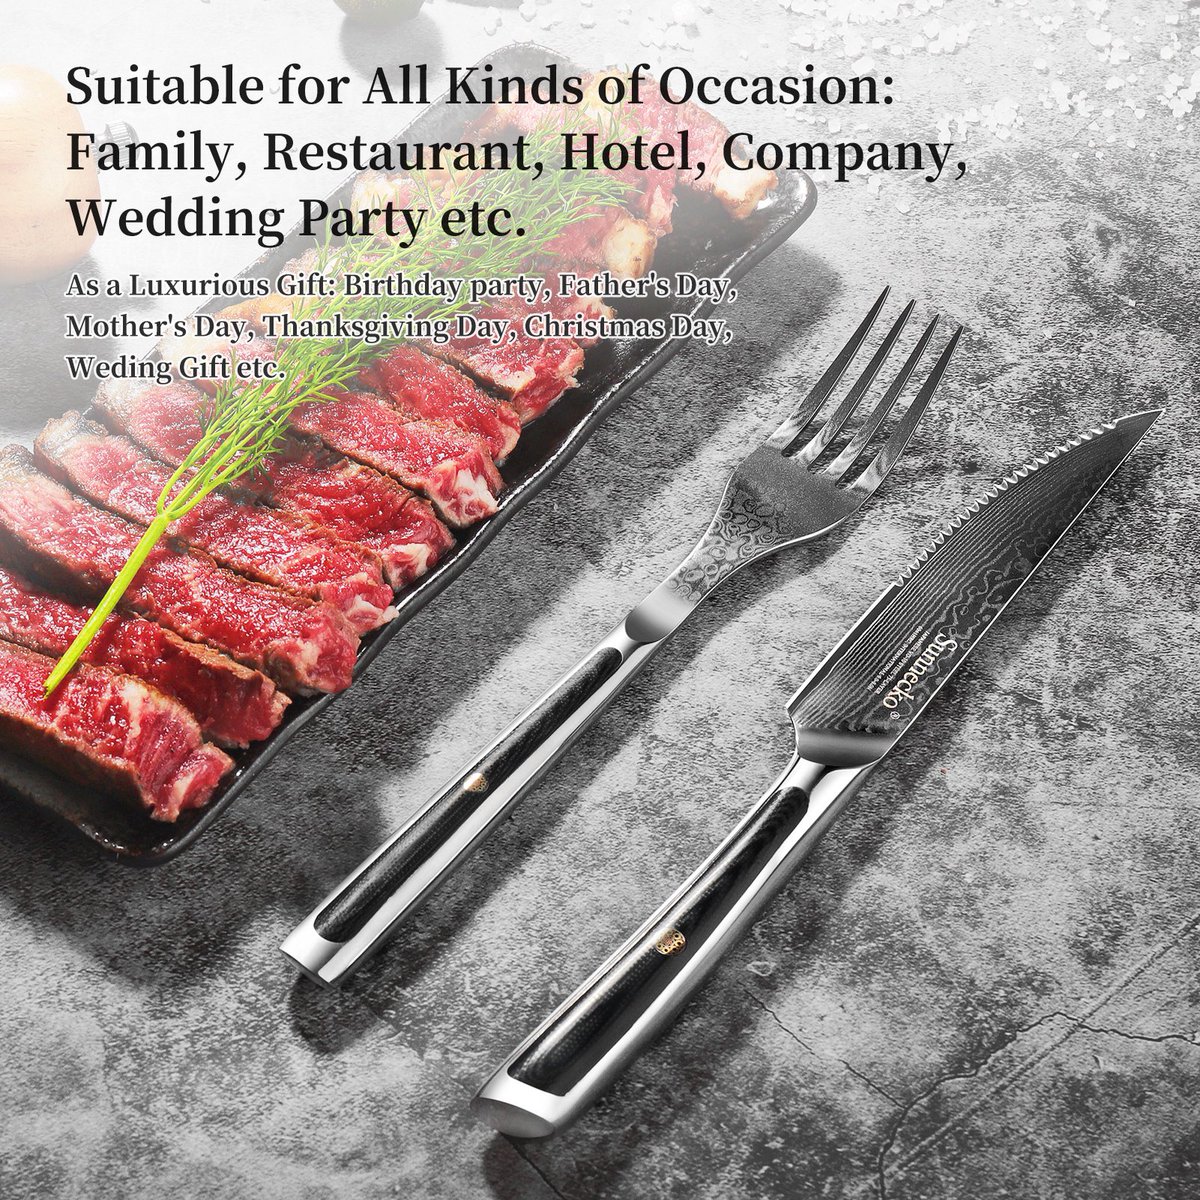 Suitable for All Kinds ofOccasion:Family, Restaurant, Hotel, CompanyWedding Party etc.
As a Luxurious Gift: Birthday party, Father's DayMother's Day, Thanksgiving Day, christmas Day,Weding Gift ete.

#Sunnecko #KitchenEssential